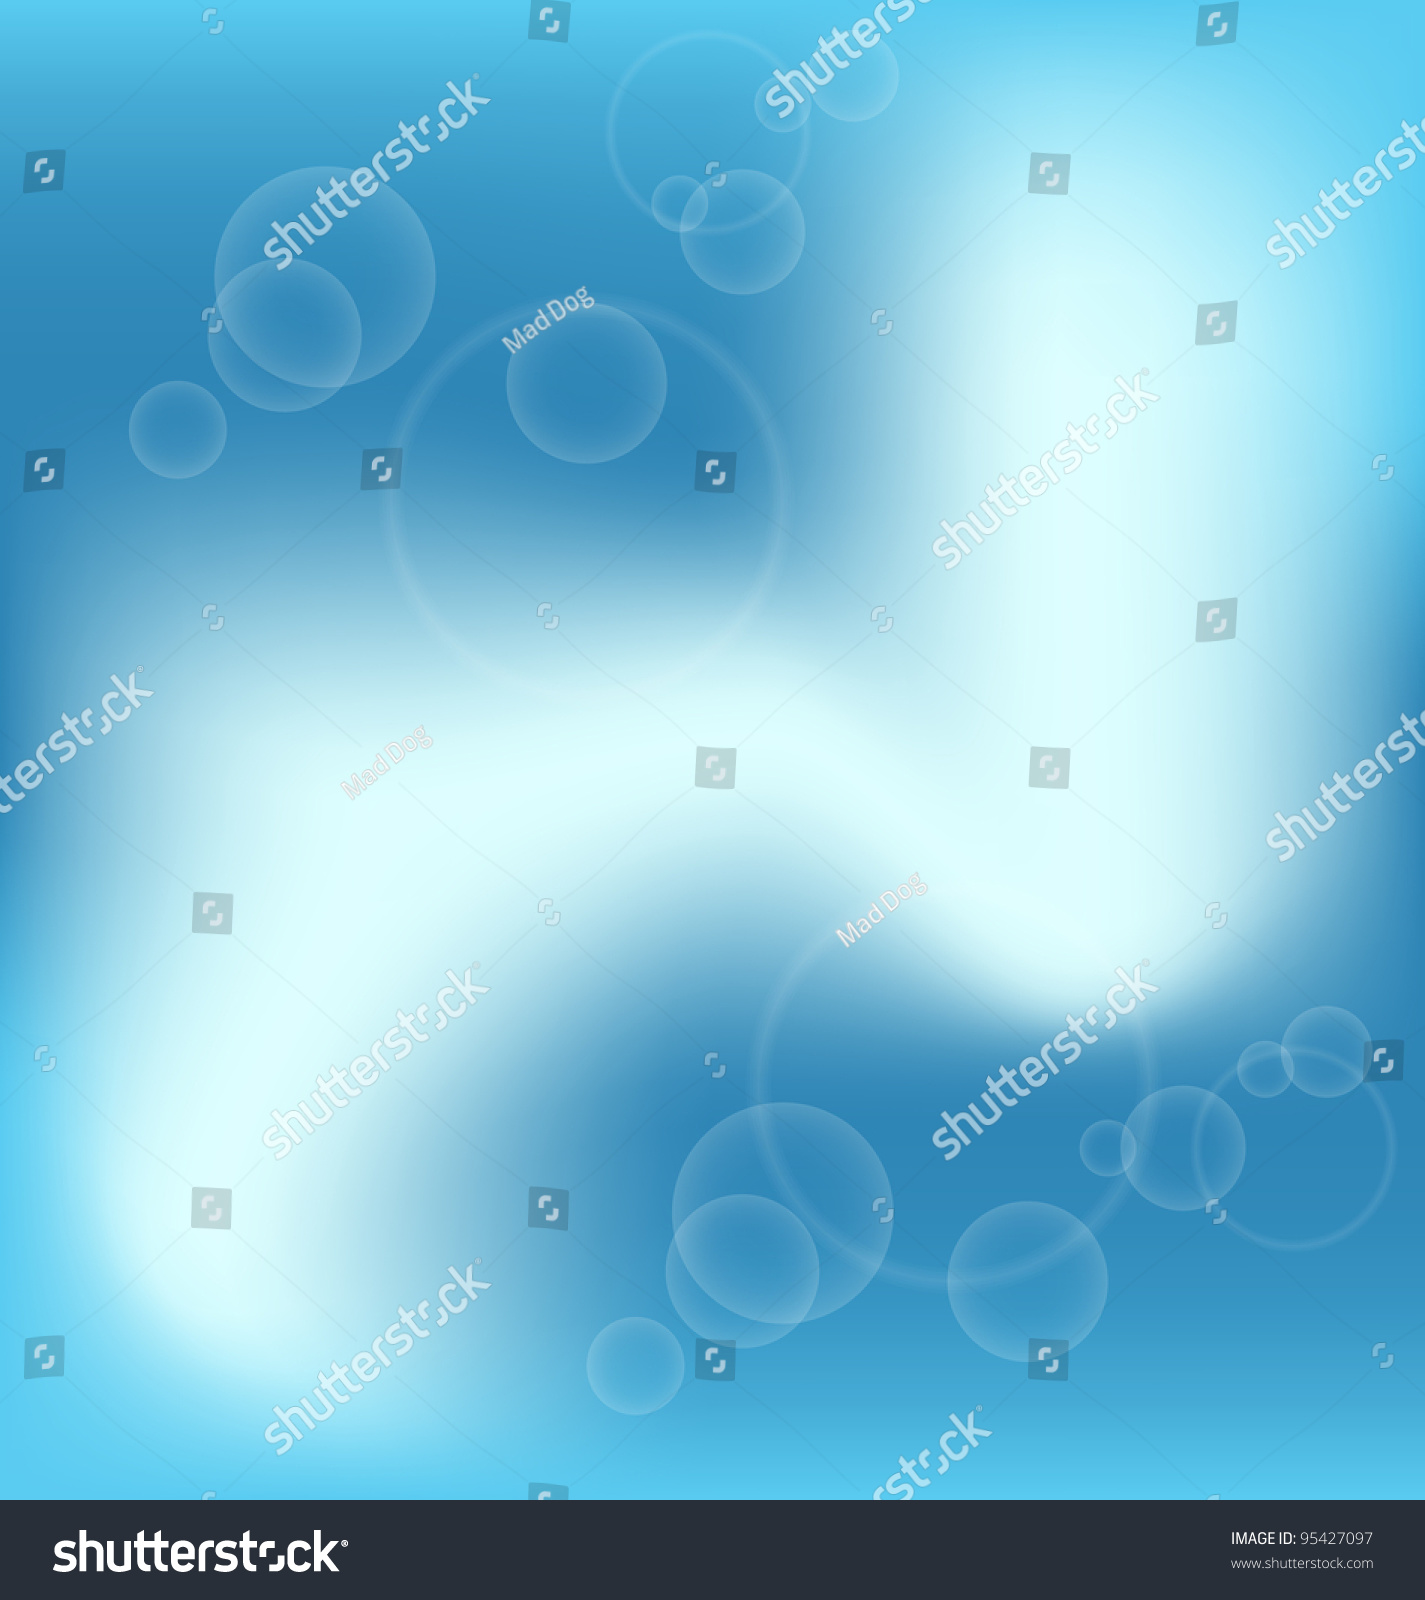 Illustration abstract blue light background for design business card - vector #95427097